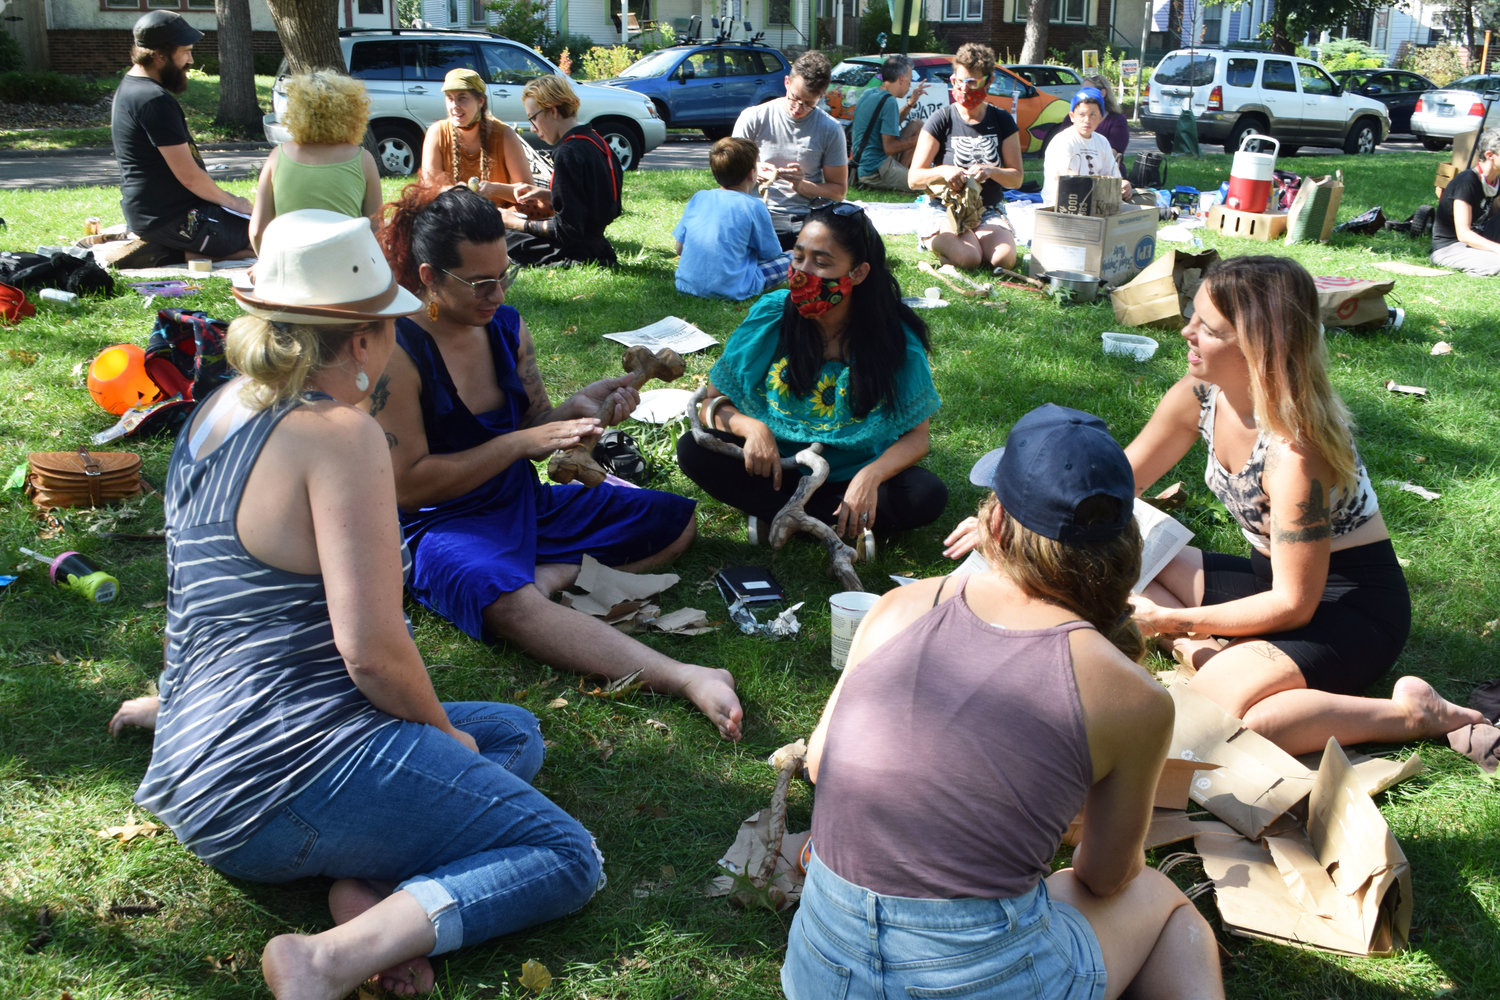 Community members create bones and other sculptures together at Powderhorn Park on Sept. 19. Gatherings are open to the public and are held every Sunday, from 1-3 pm near the 10th Ave. and 33rd St. playground entrance, until the Extravaganza. (Photo by Jill Boogren)